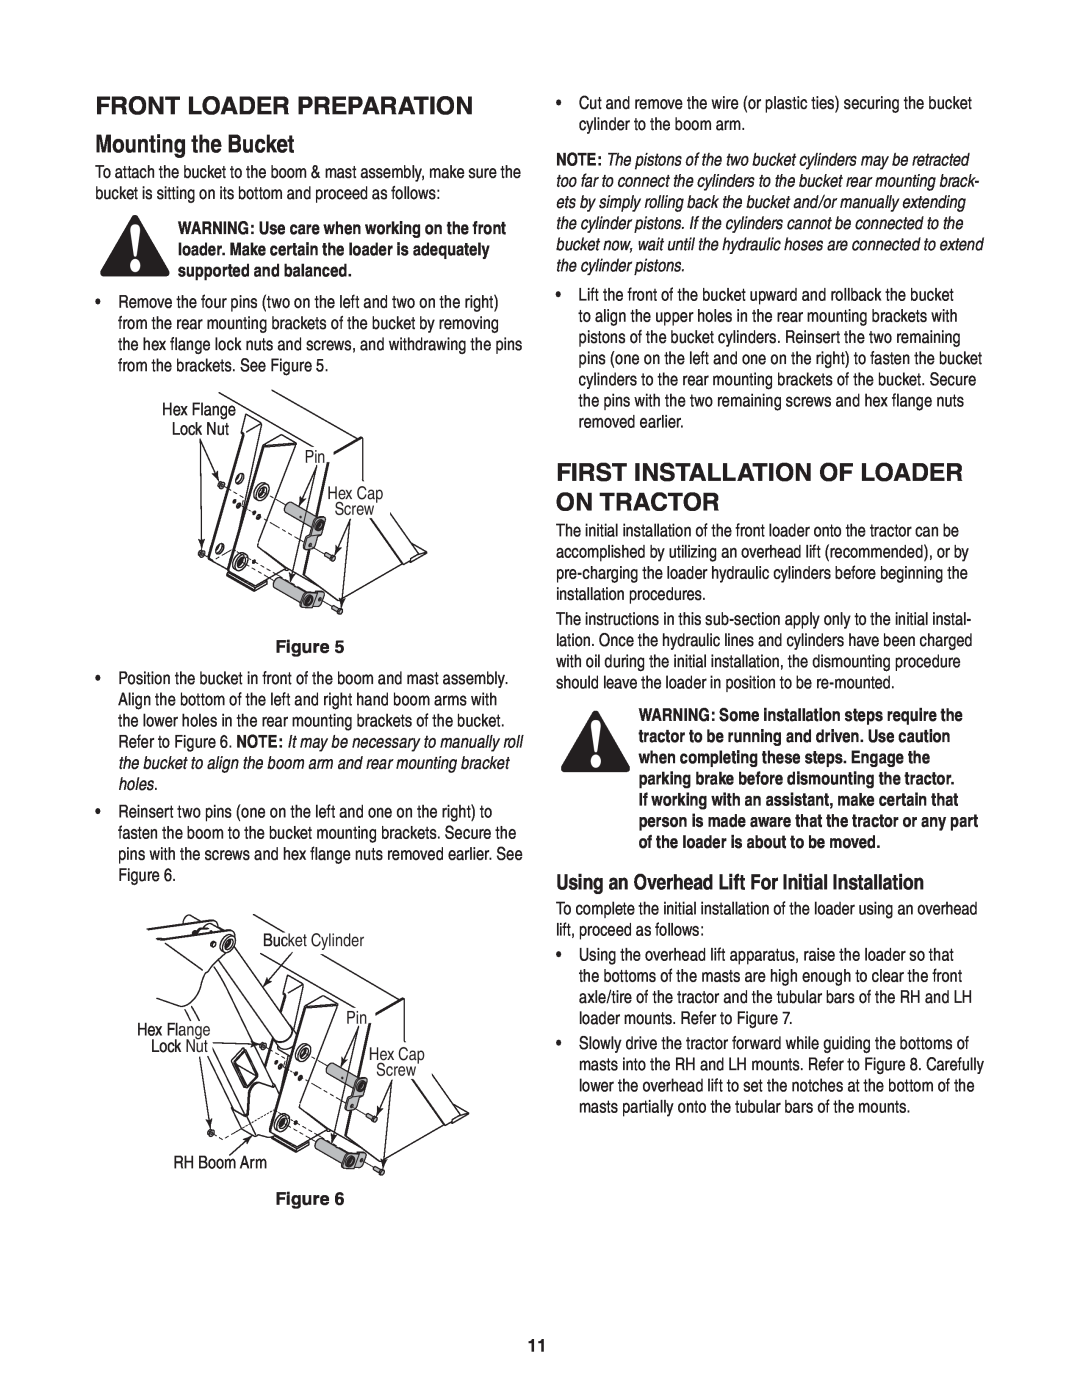 Cub Cadet 59A40003727 manual Front Loader Preparation Mounting the Bucket, first installation of Loader on Tractor 